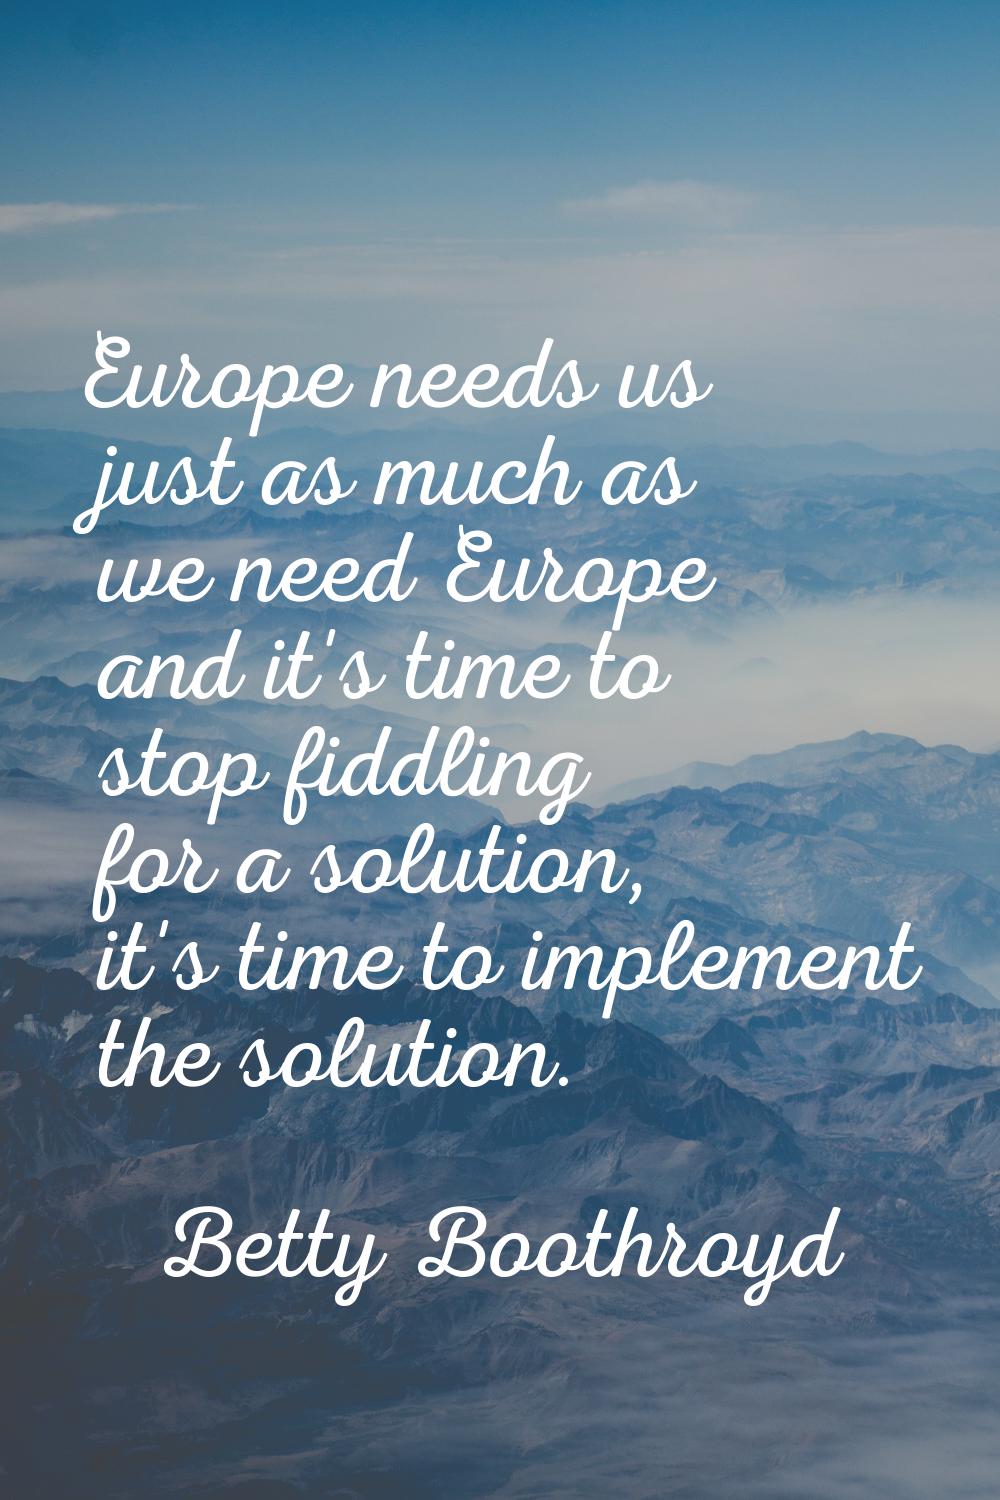 Europe needs us just as much as we need Europe and it's time to stop fiddling for a solution, it's 